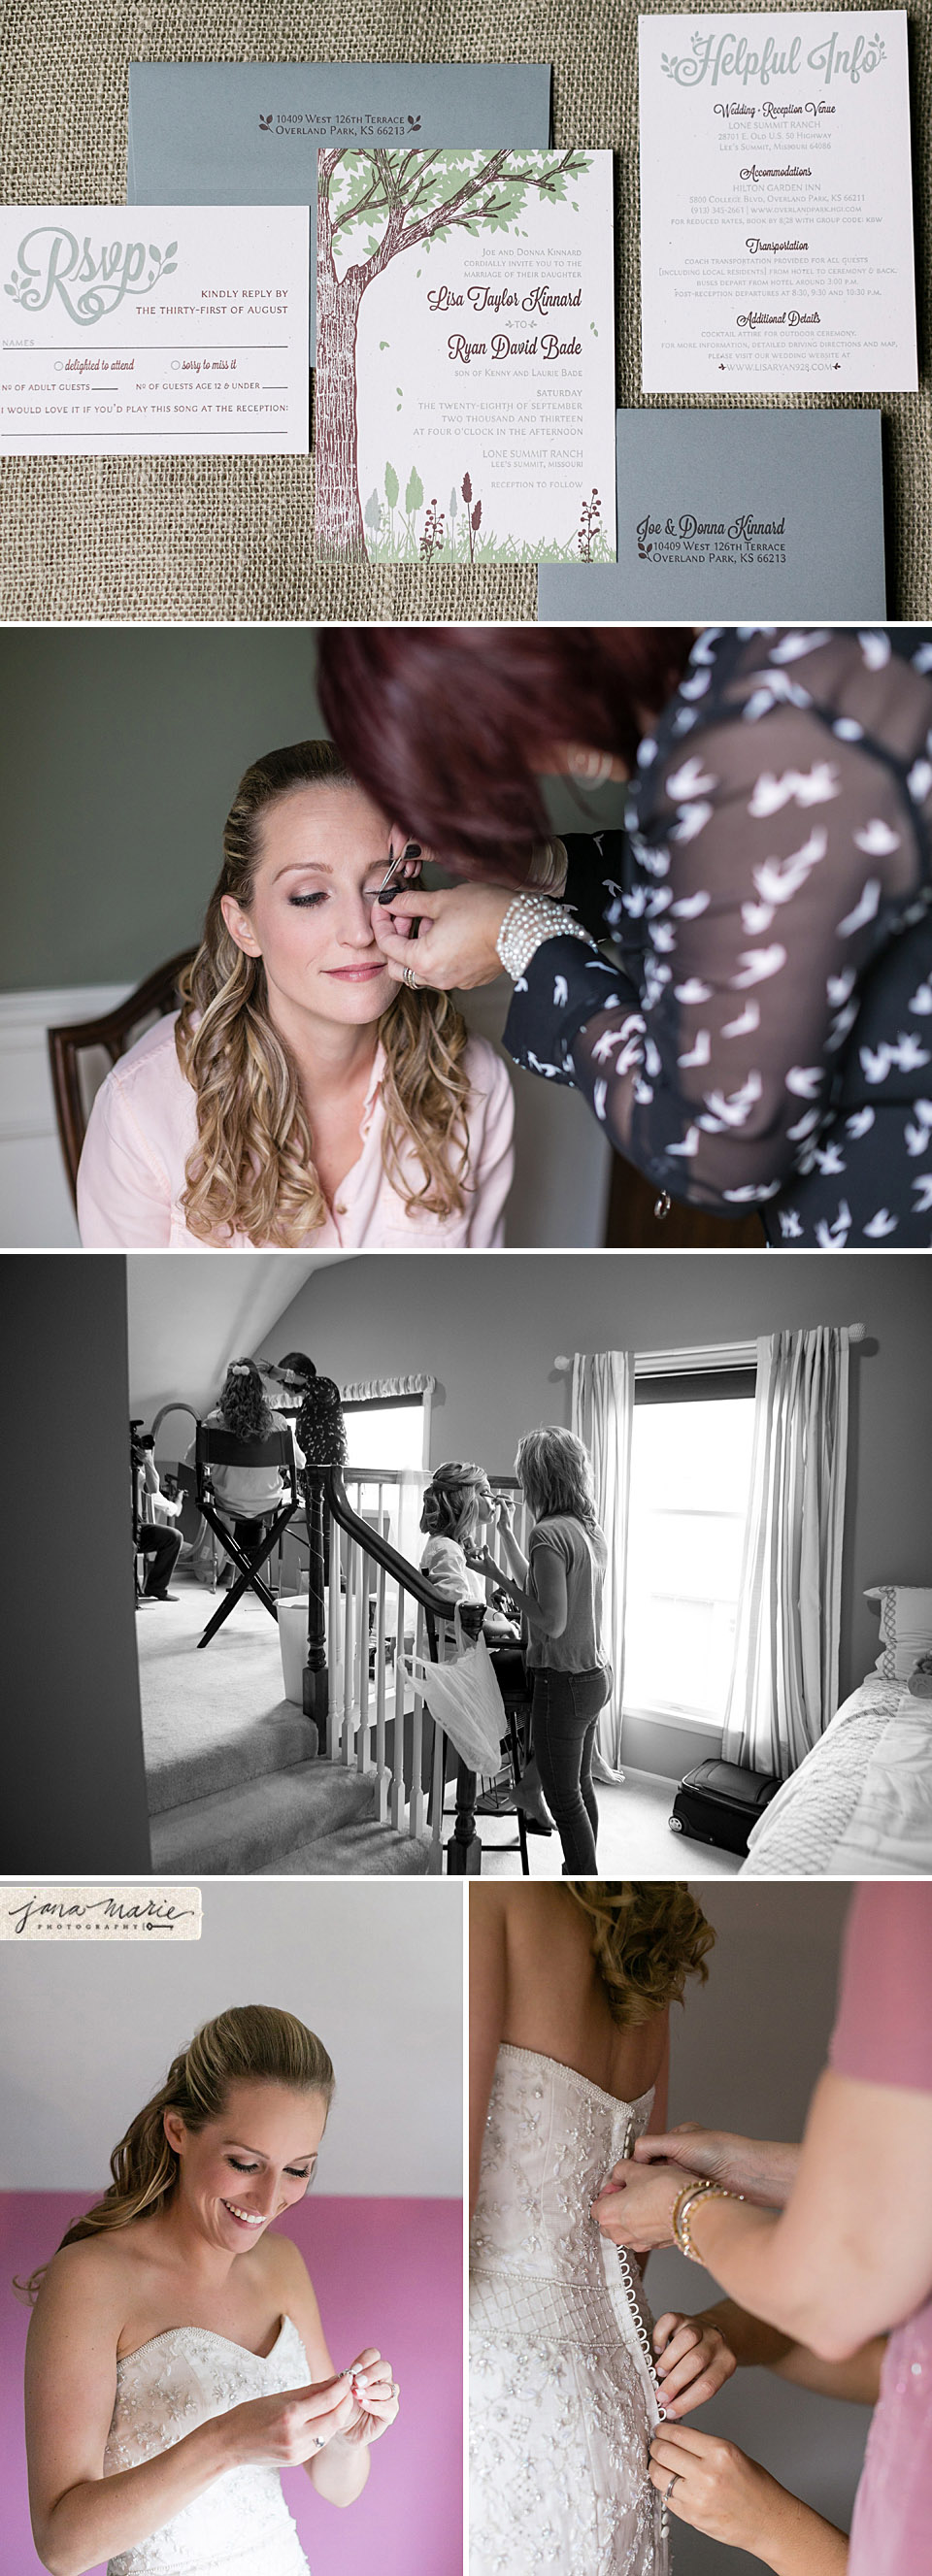 Getting ready, wedding details, bridesmaids, Jana Marie Photography, Lone Summit Ranch